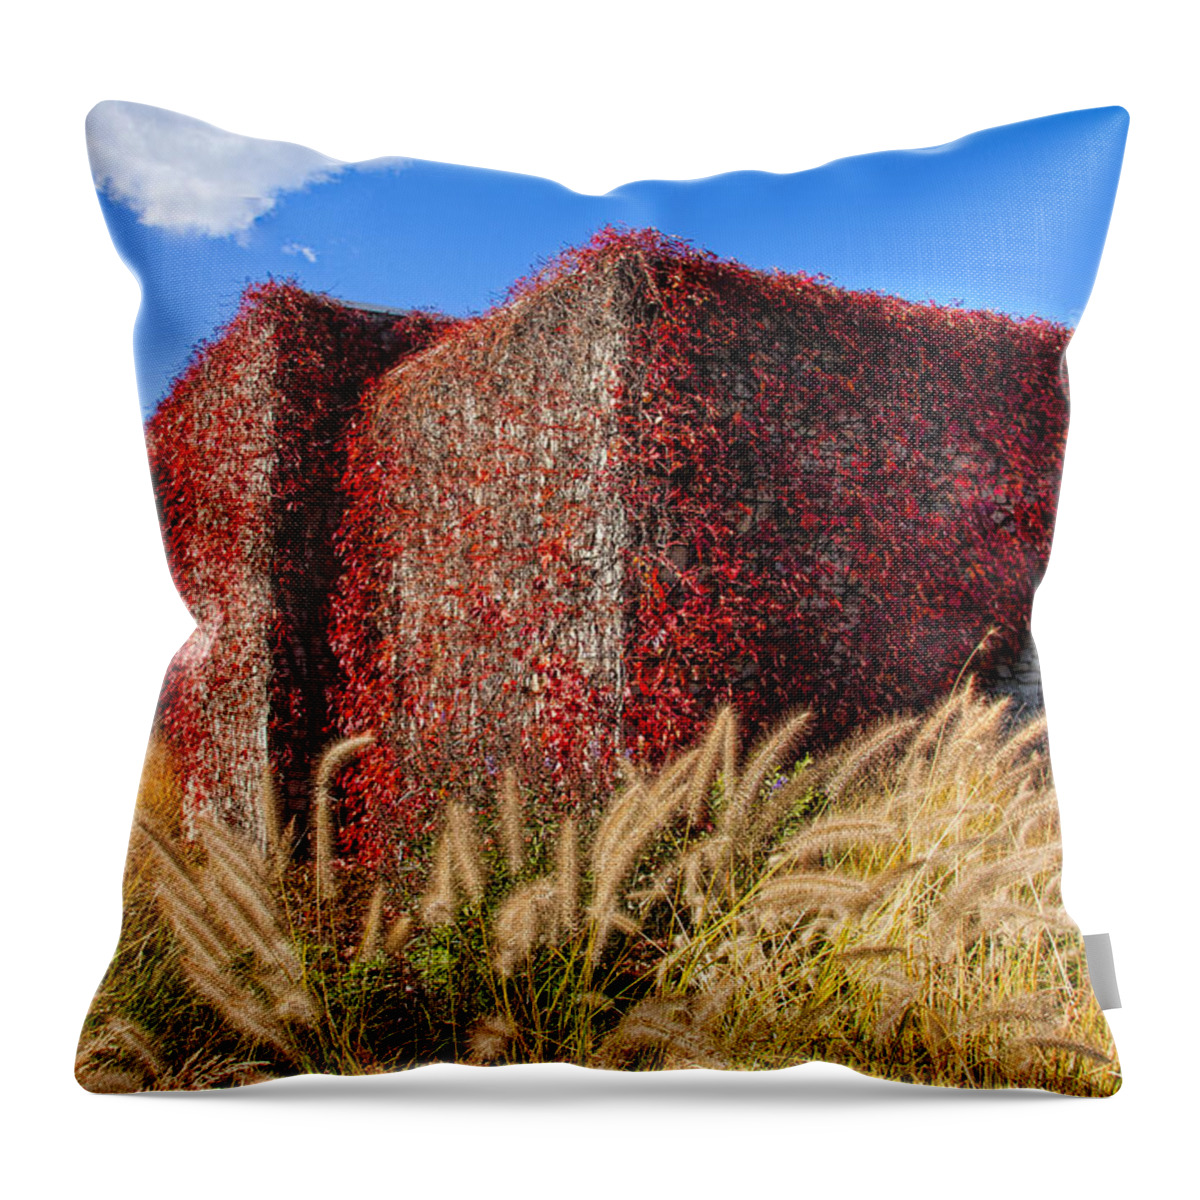 Garden Throw Pillow featuring the photograph Garden Geometry by Marilyn Cornwell